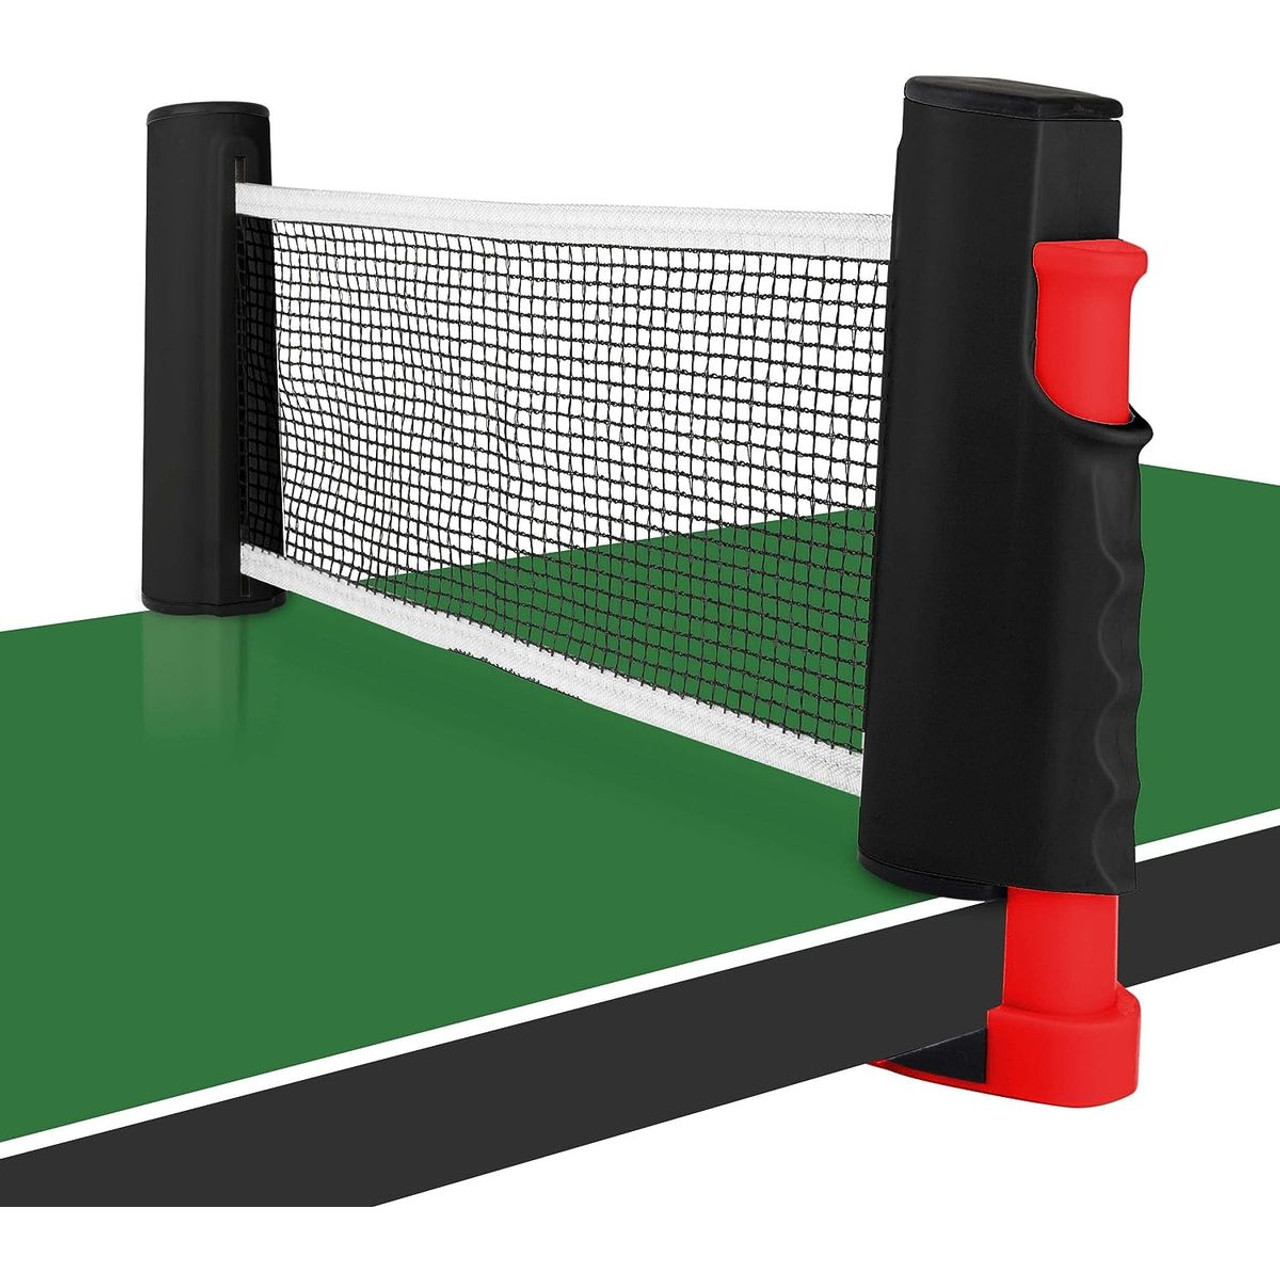 HAKOL Ping Pong Set with 2 Paddles & Net product image